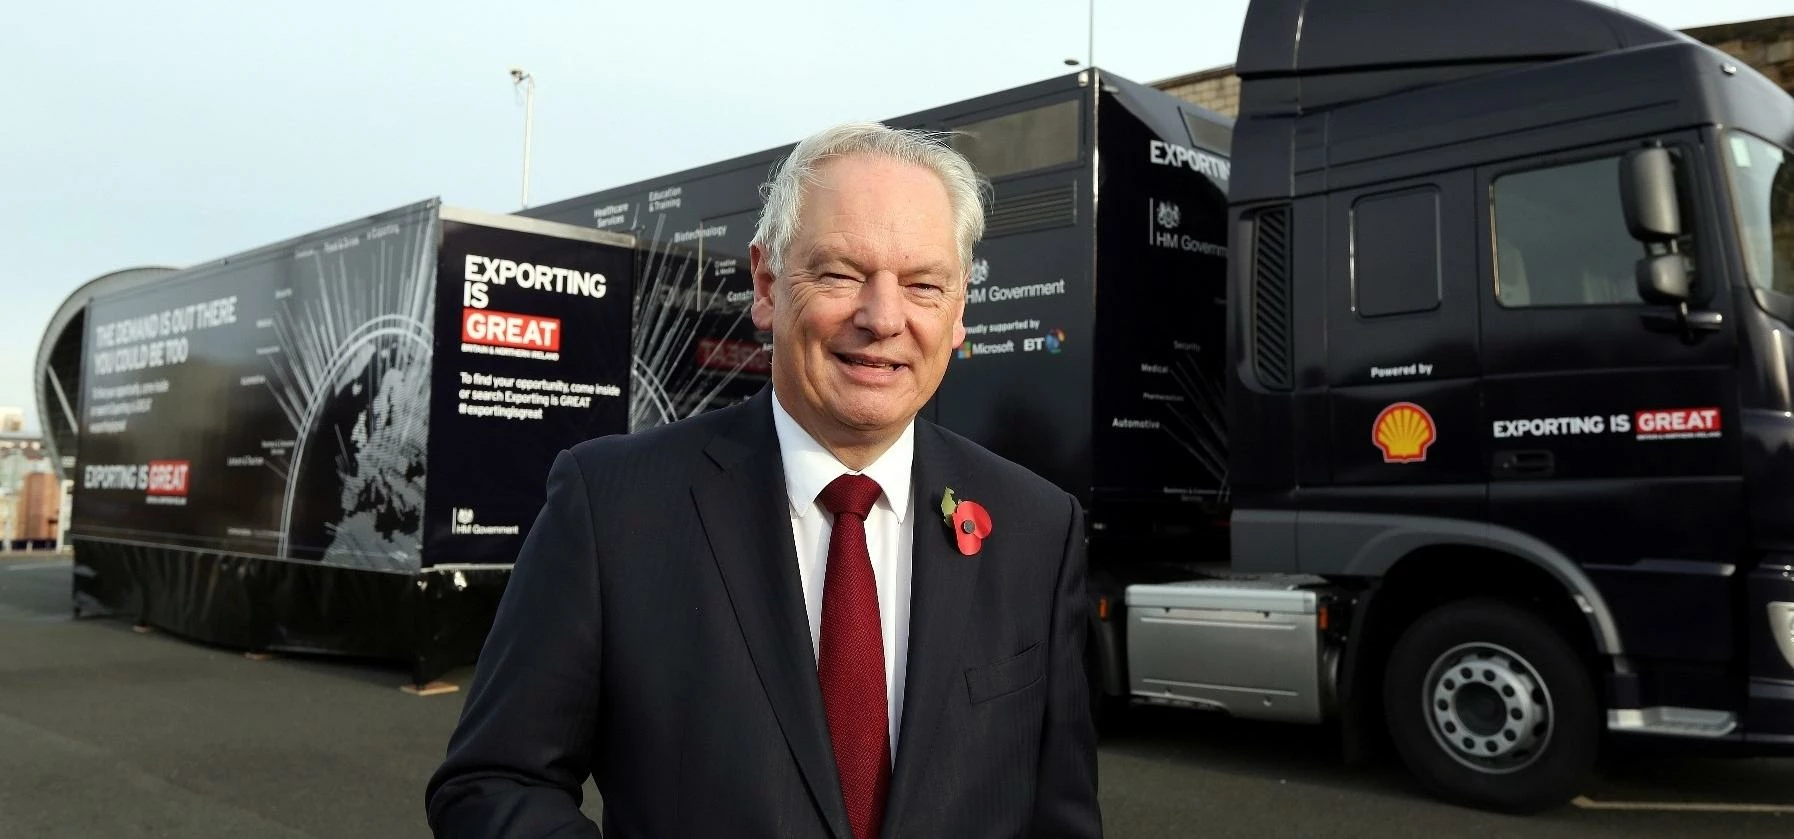 Minister for Trade and Investment Francis Maude outside the Export Hub